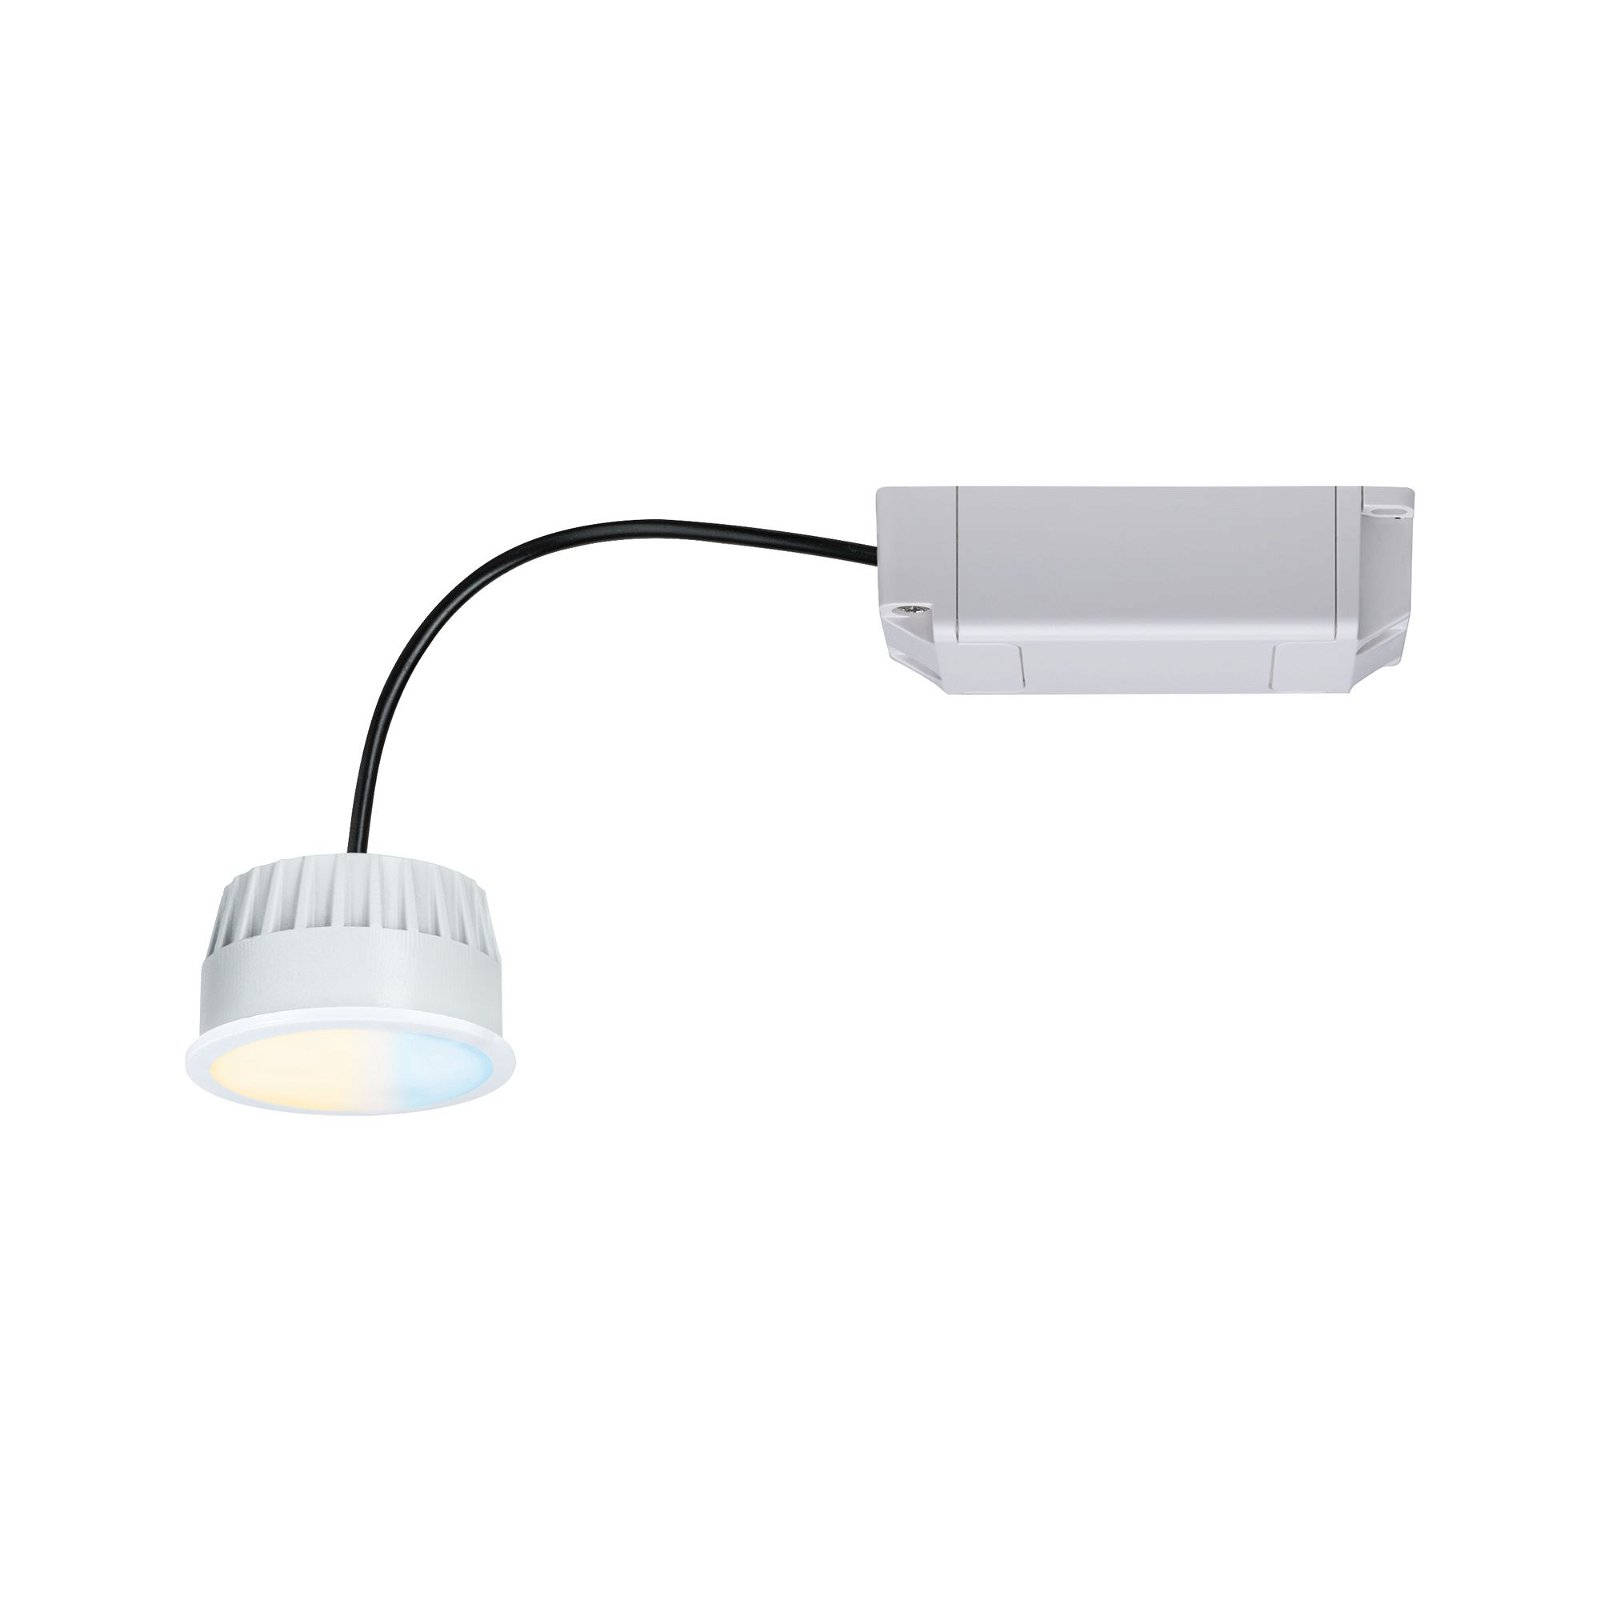 LED-module inbouwlamp Smart Home Zigbee Tunable White Coin rond 50mm Coin 6W 470lm 230V dimbaar Tunable White Satijn